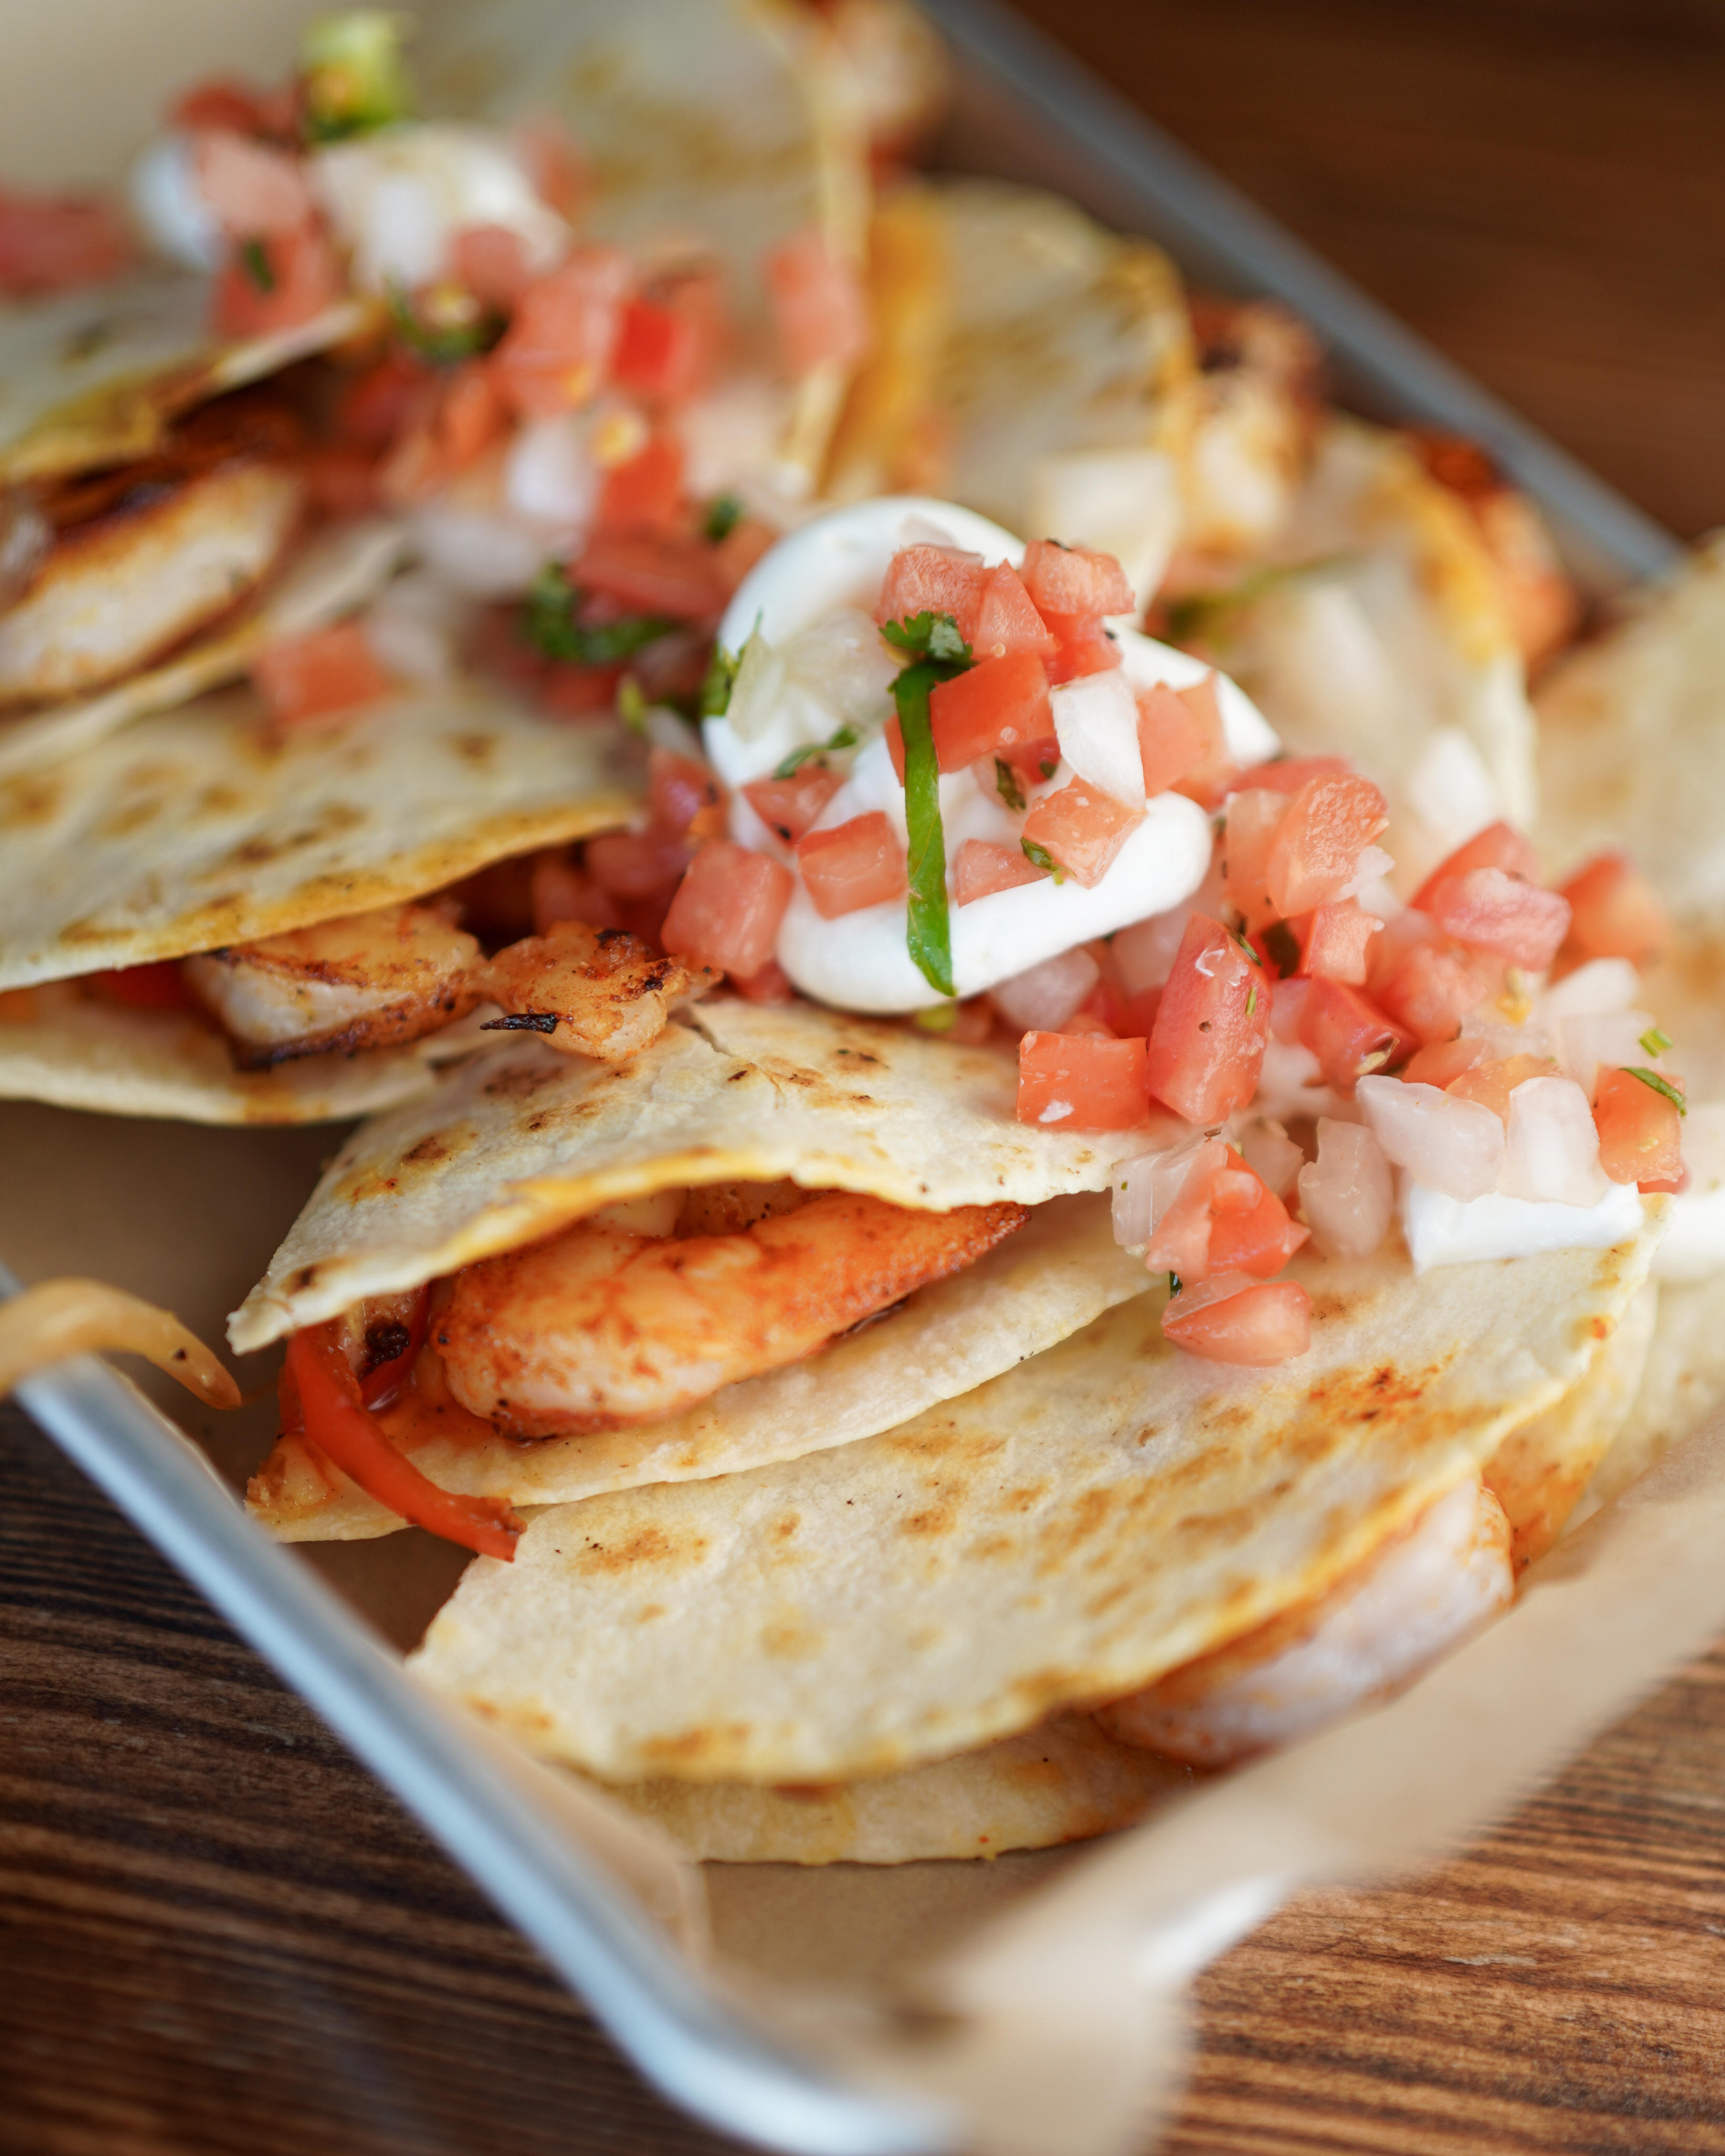 QUESADILLA - Your choice of sautéed shrimp or grilled chicken, with onions, bell peppers and nacho c Joey's Fish Shack Medicine Hat (403)487-4883